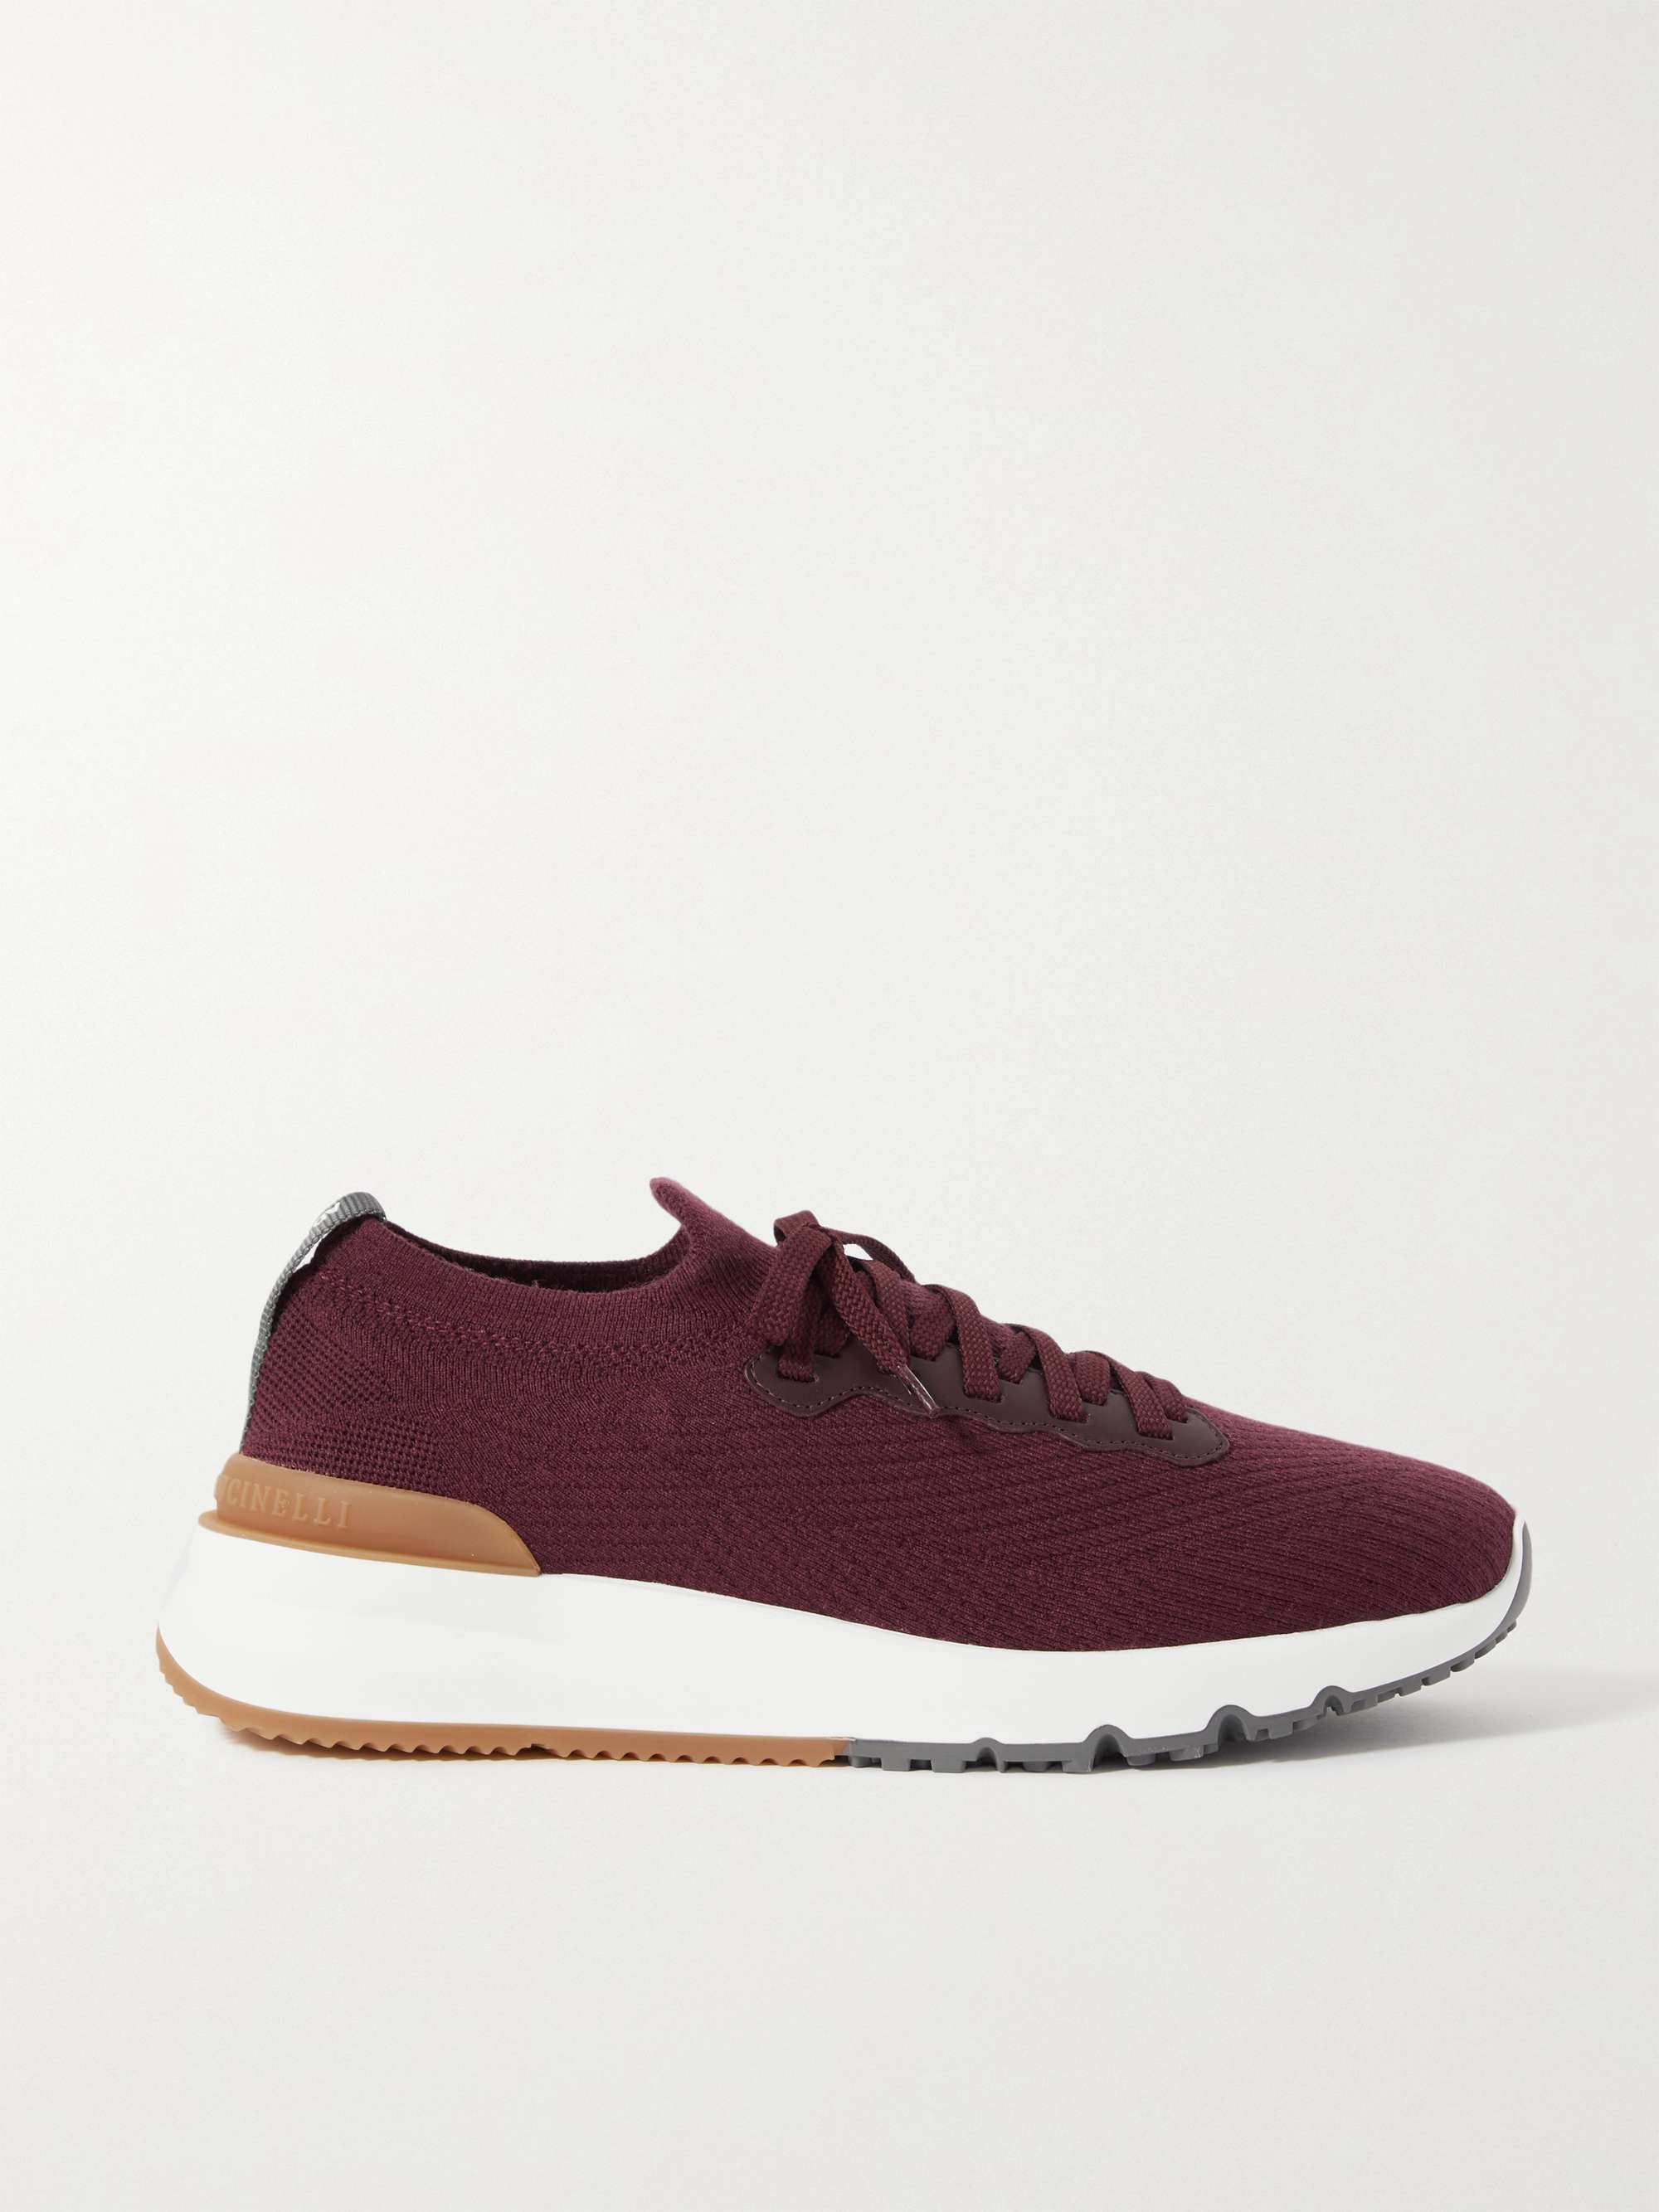 Burgundy Cambridge Leather-Trimmed Suede Sneakers | TOM FORD | MR 